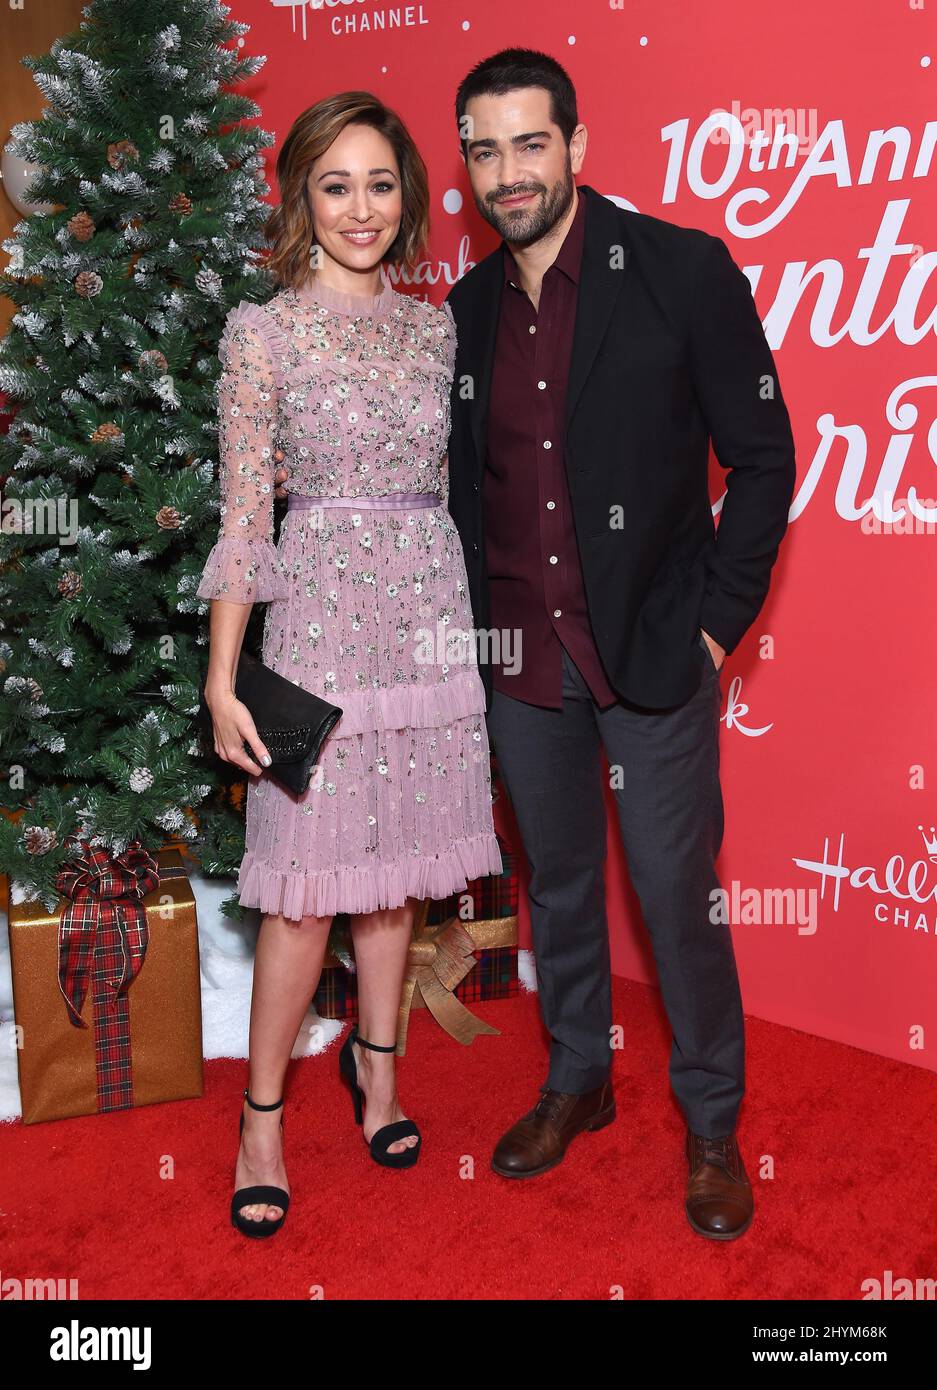 Autumn Reeser and Jesse Metcalfe attending the Christmas Under the Stars€™ Special Screening in Los Angeles Stock Photo